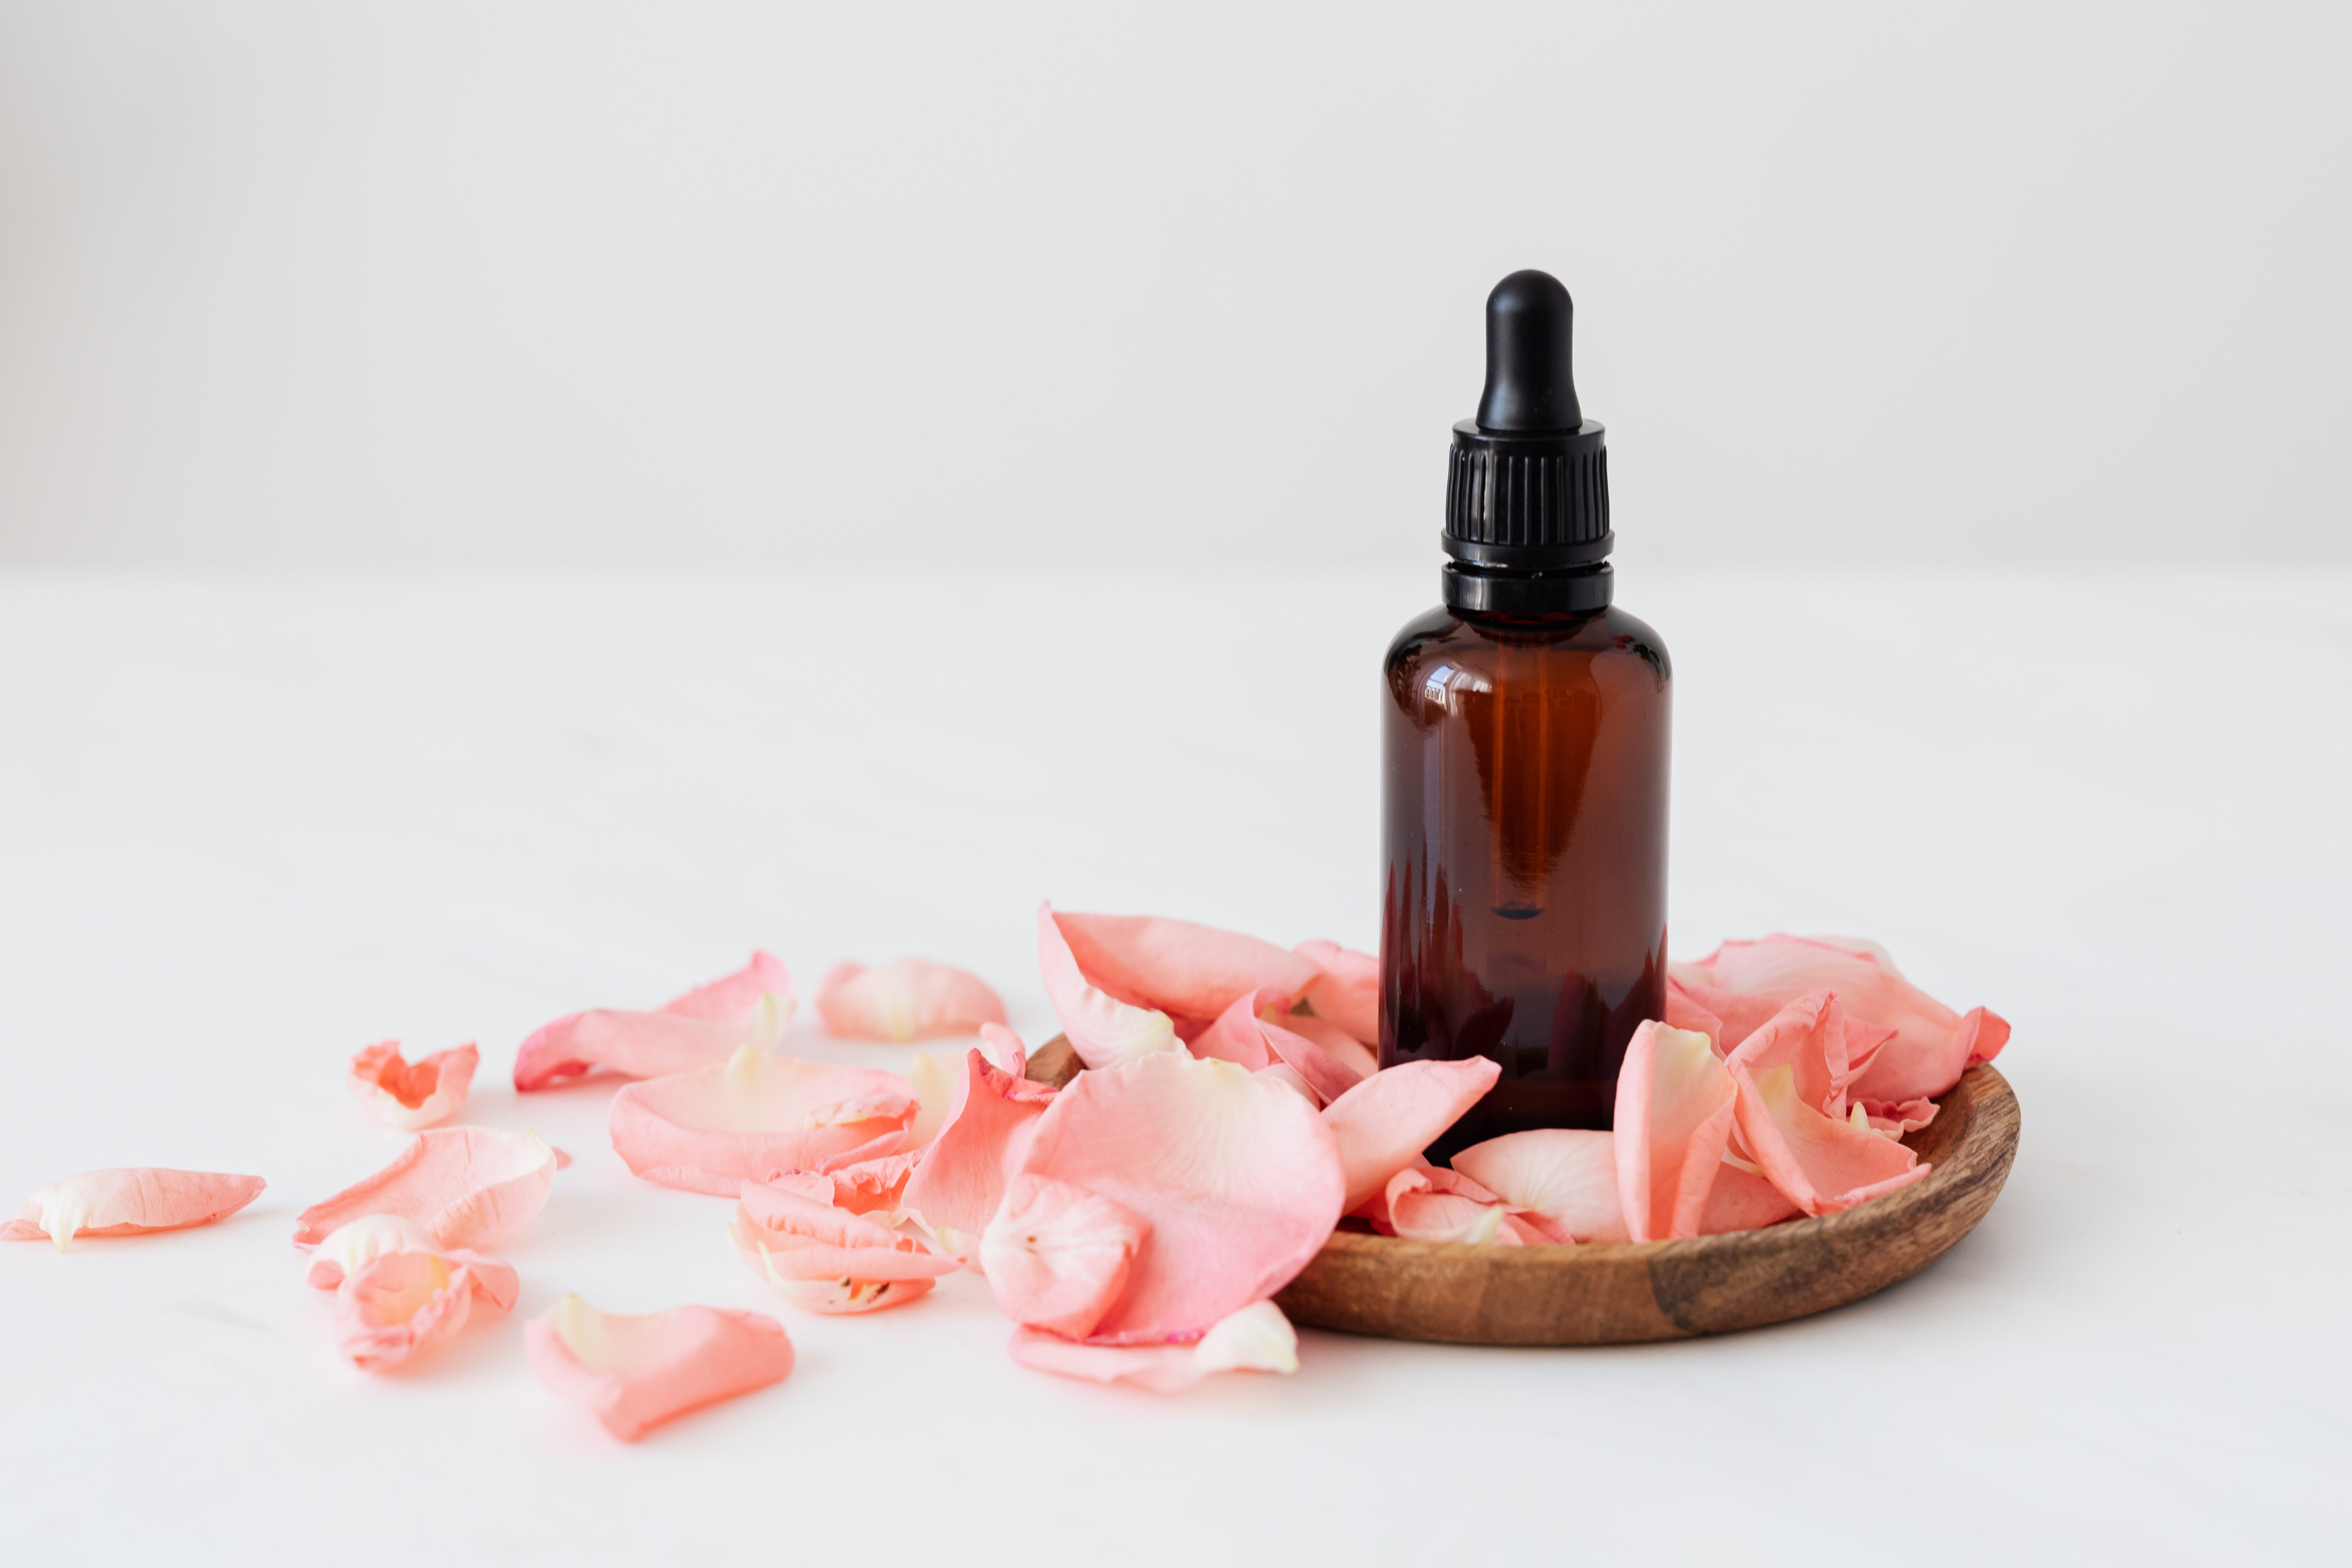 A closed brown CBD tincture bottle sitting on a wooden platter surrounded by pink flower petals